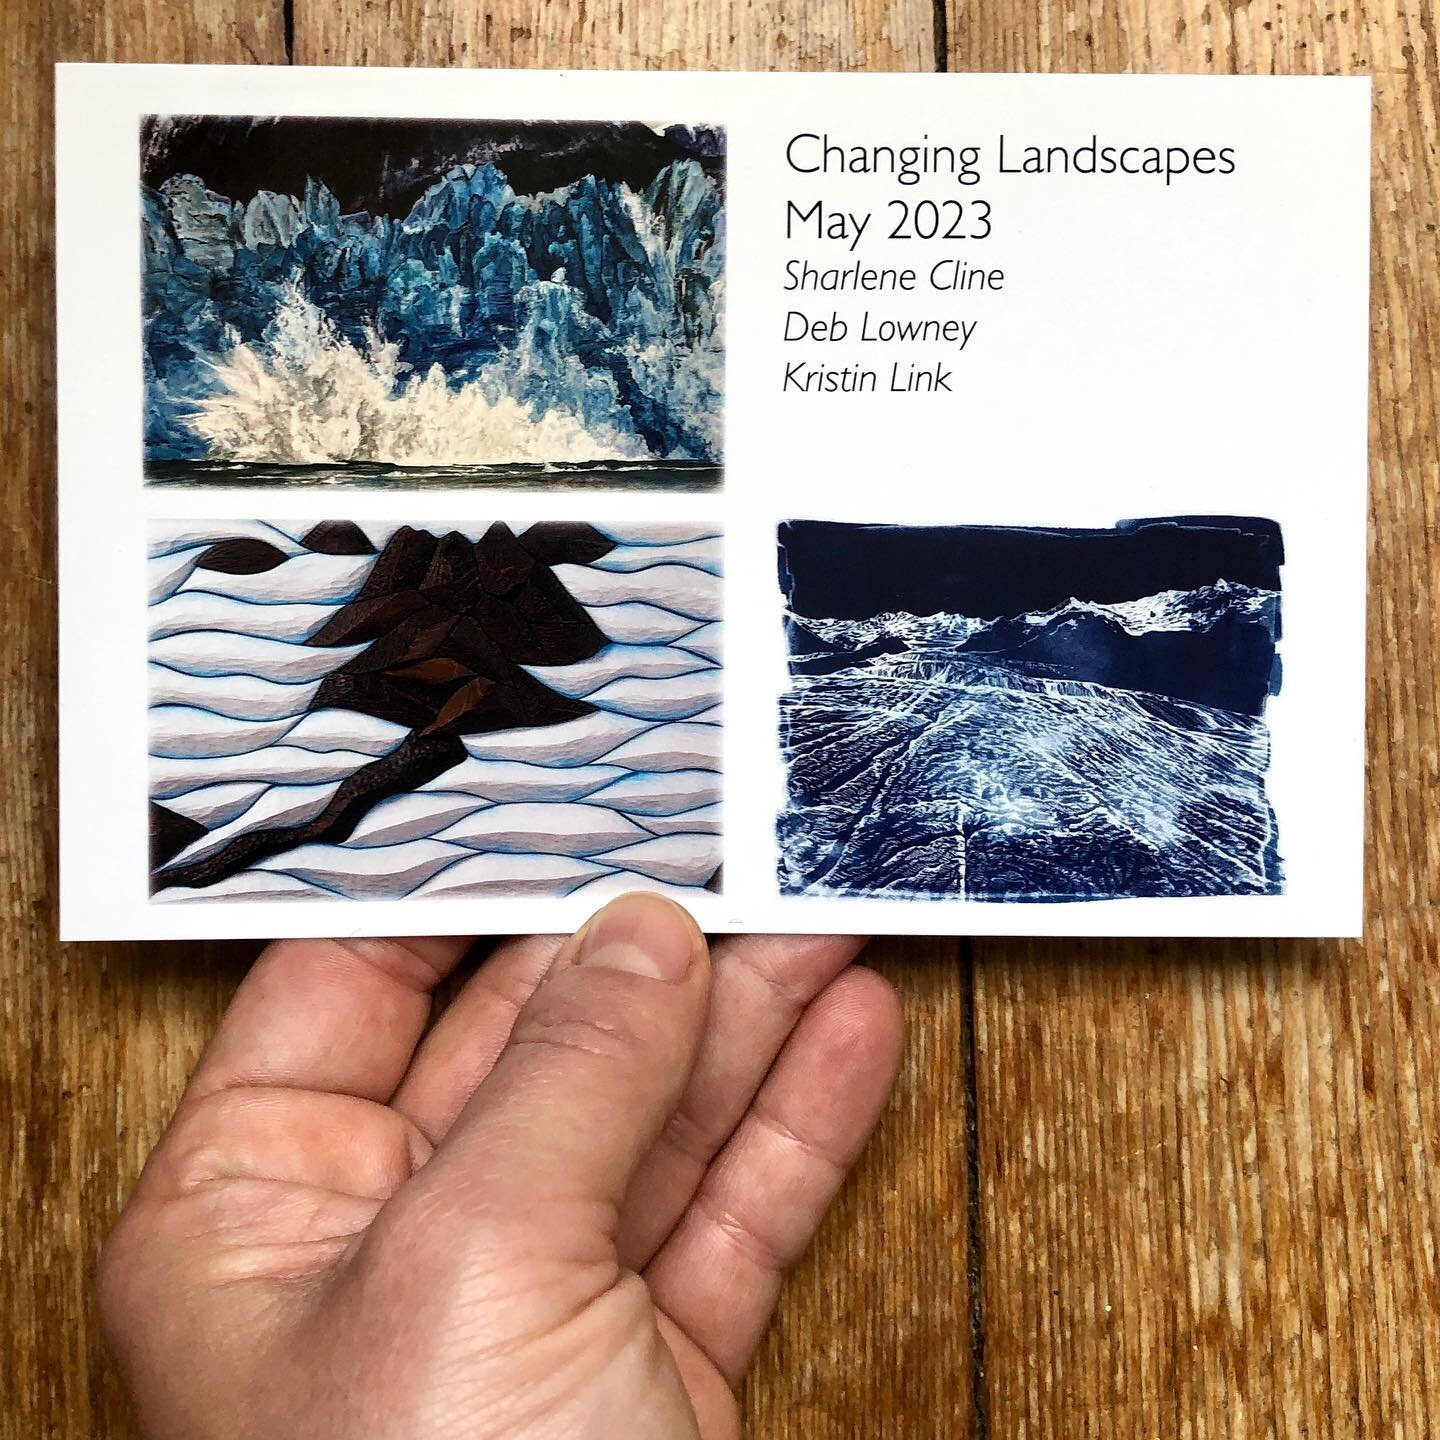 Tonight! Join us for the opening of Changing Landscapes at Bunnell Street Arts Center in Homer. I&rsquo;m so excited to share my new cyanotype work along side the work of Sharlene Cline and Deb Lowney. Opening from 5-7 pm with an artist talk at 6 pm.